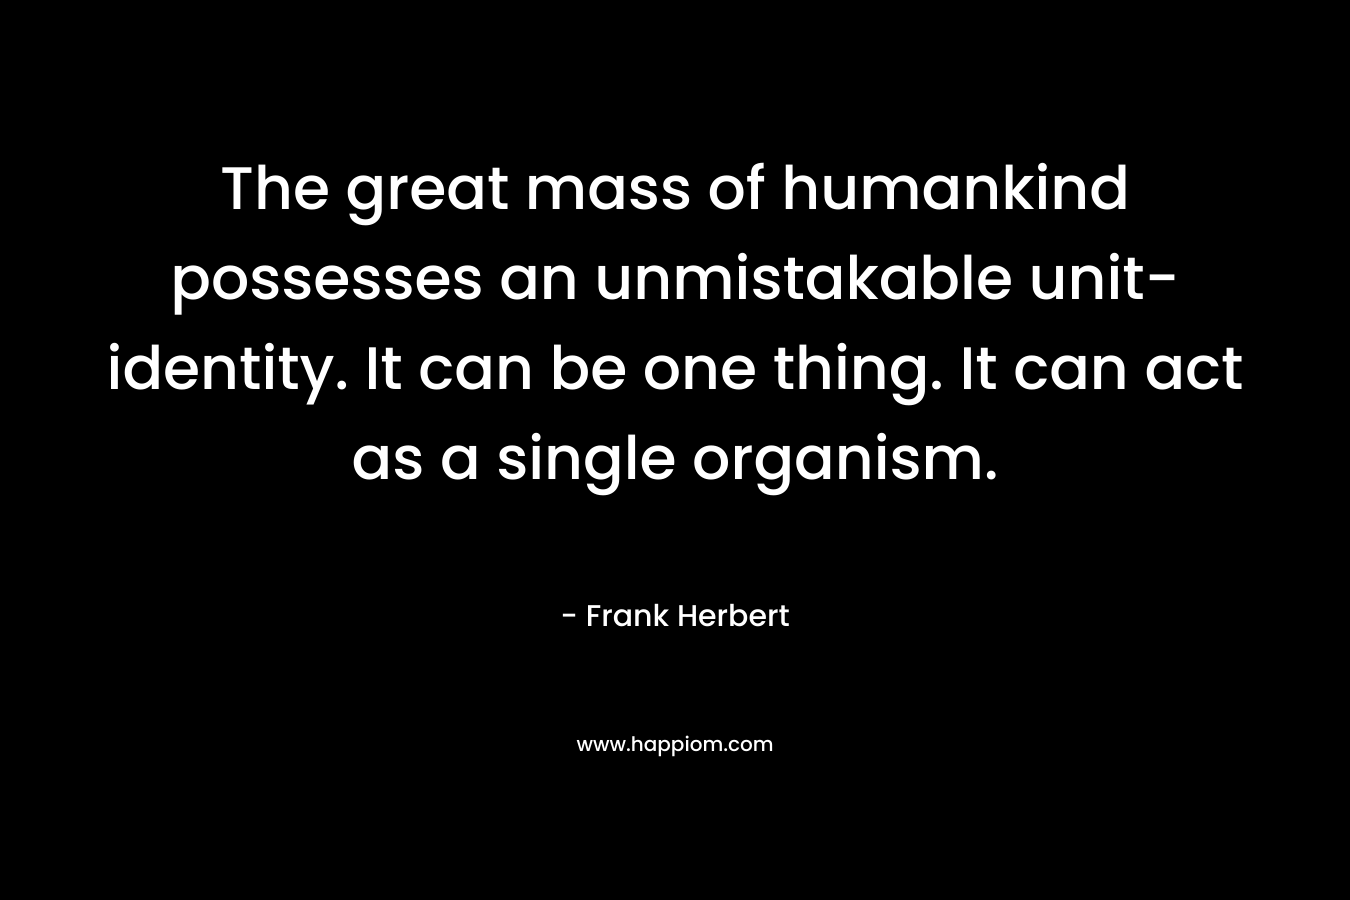 The great mass of humankind possesses an unmistakable unit-identity. It can be one thing. It can act as a single organism.